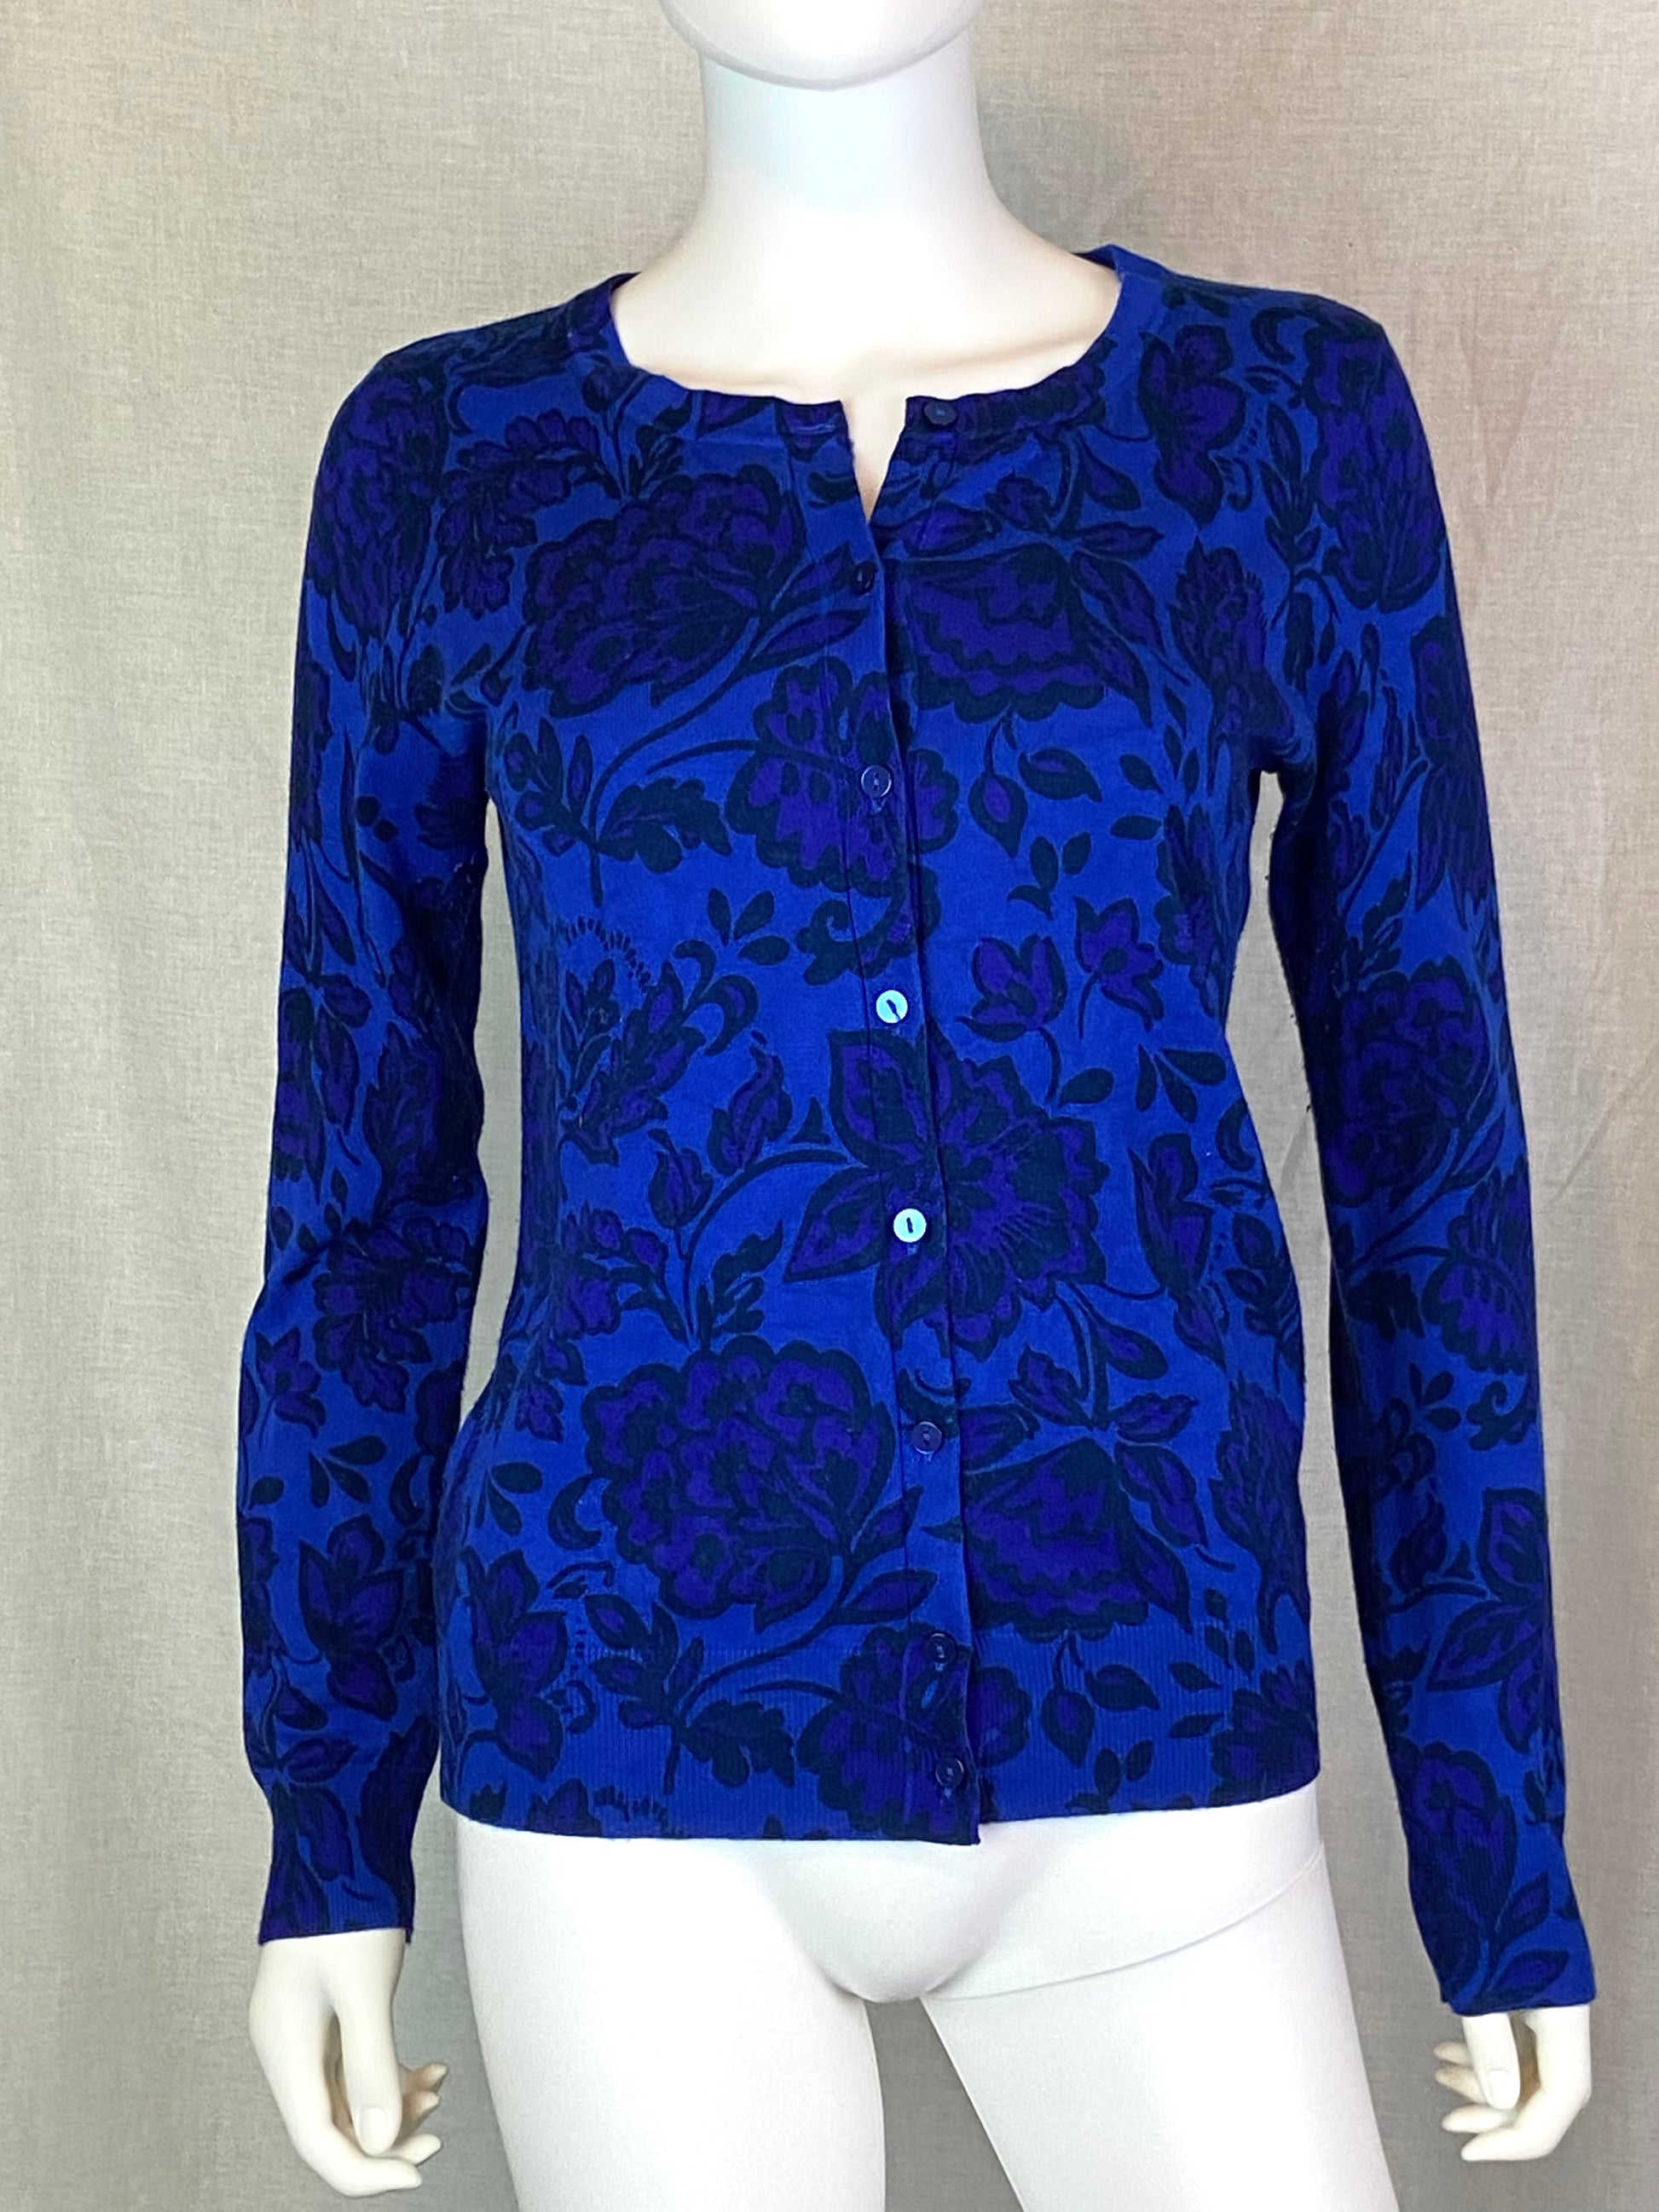 Royal Blue Purple Floral Roses Sweater Small 4-6 ABBY ESSIE STUDIOS